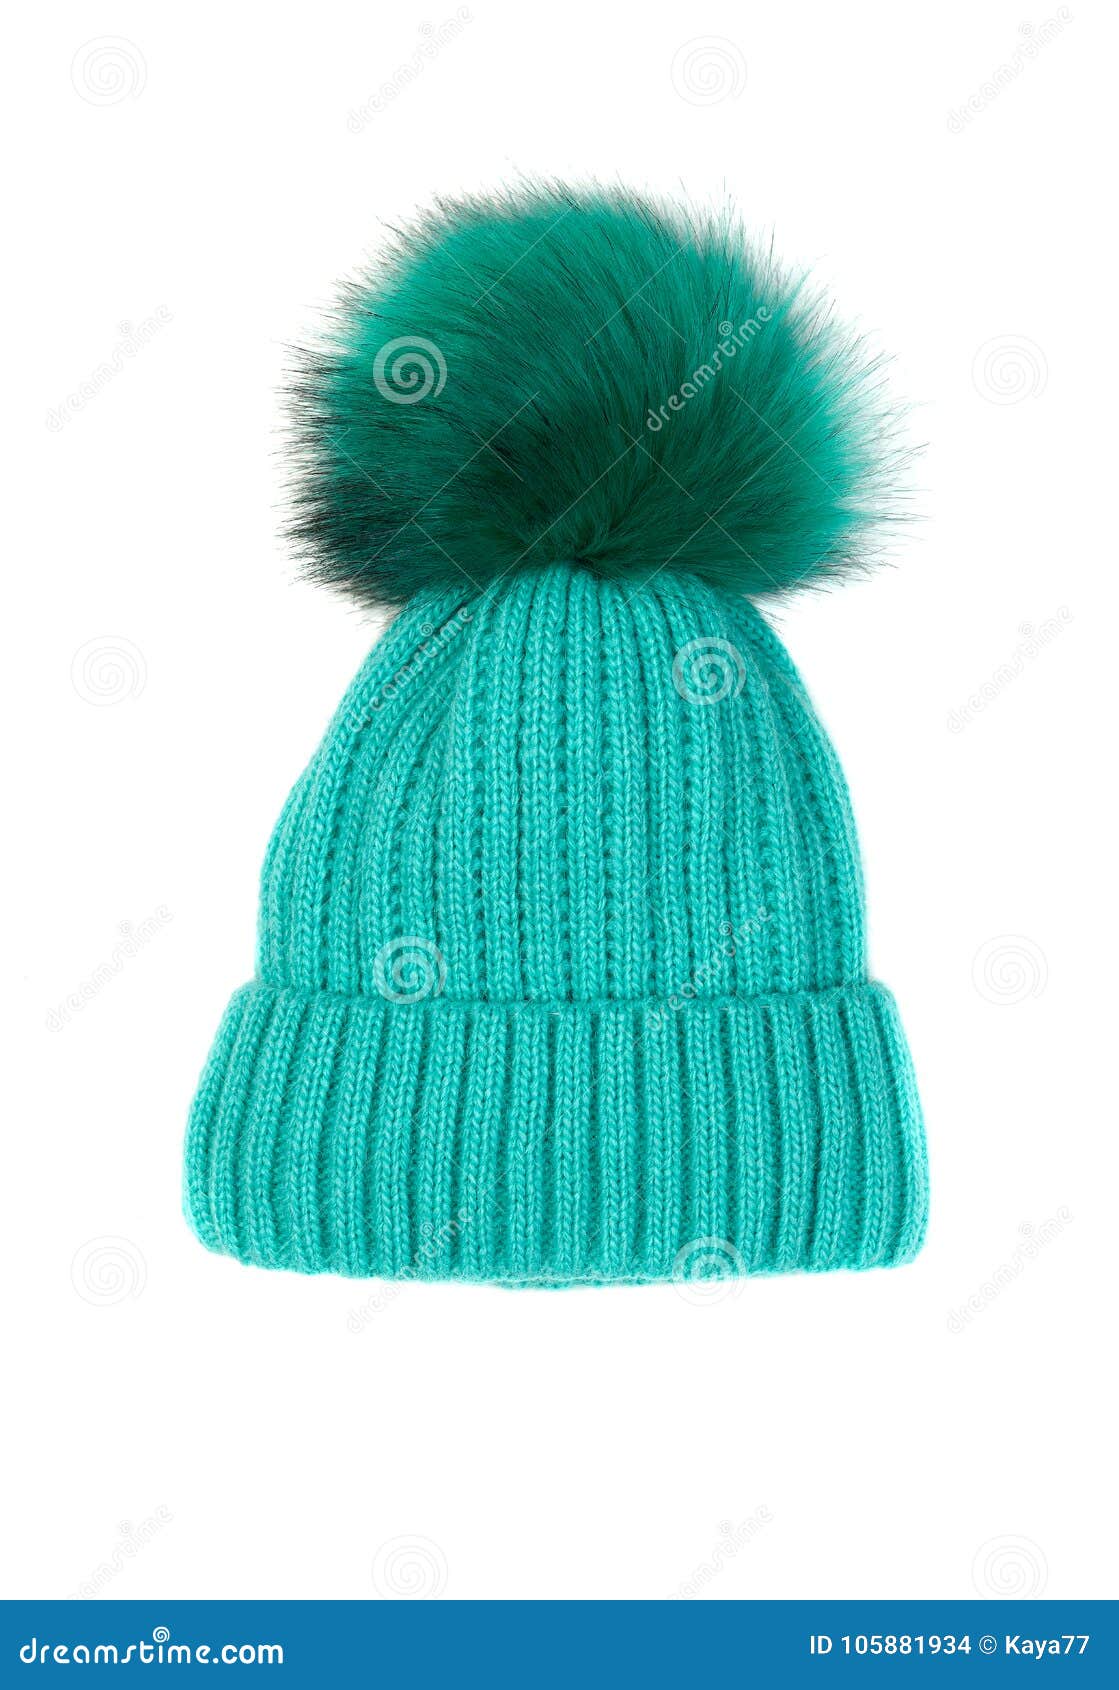 Green Children`s Hat. Isolate On White Stock Photo - Image of blue ...